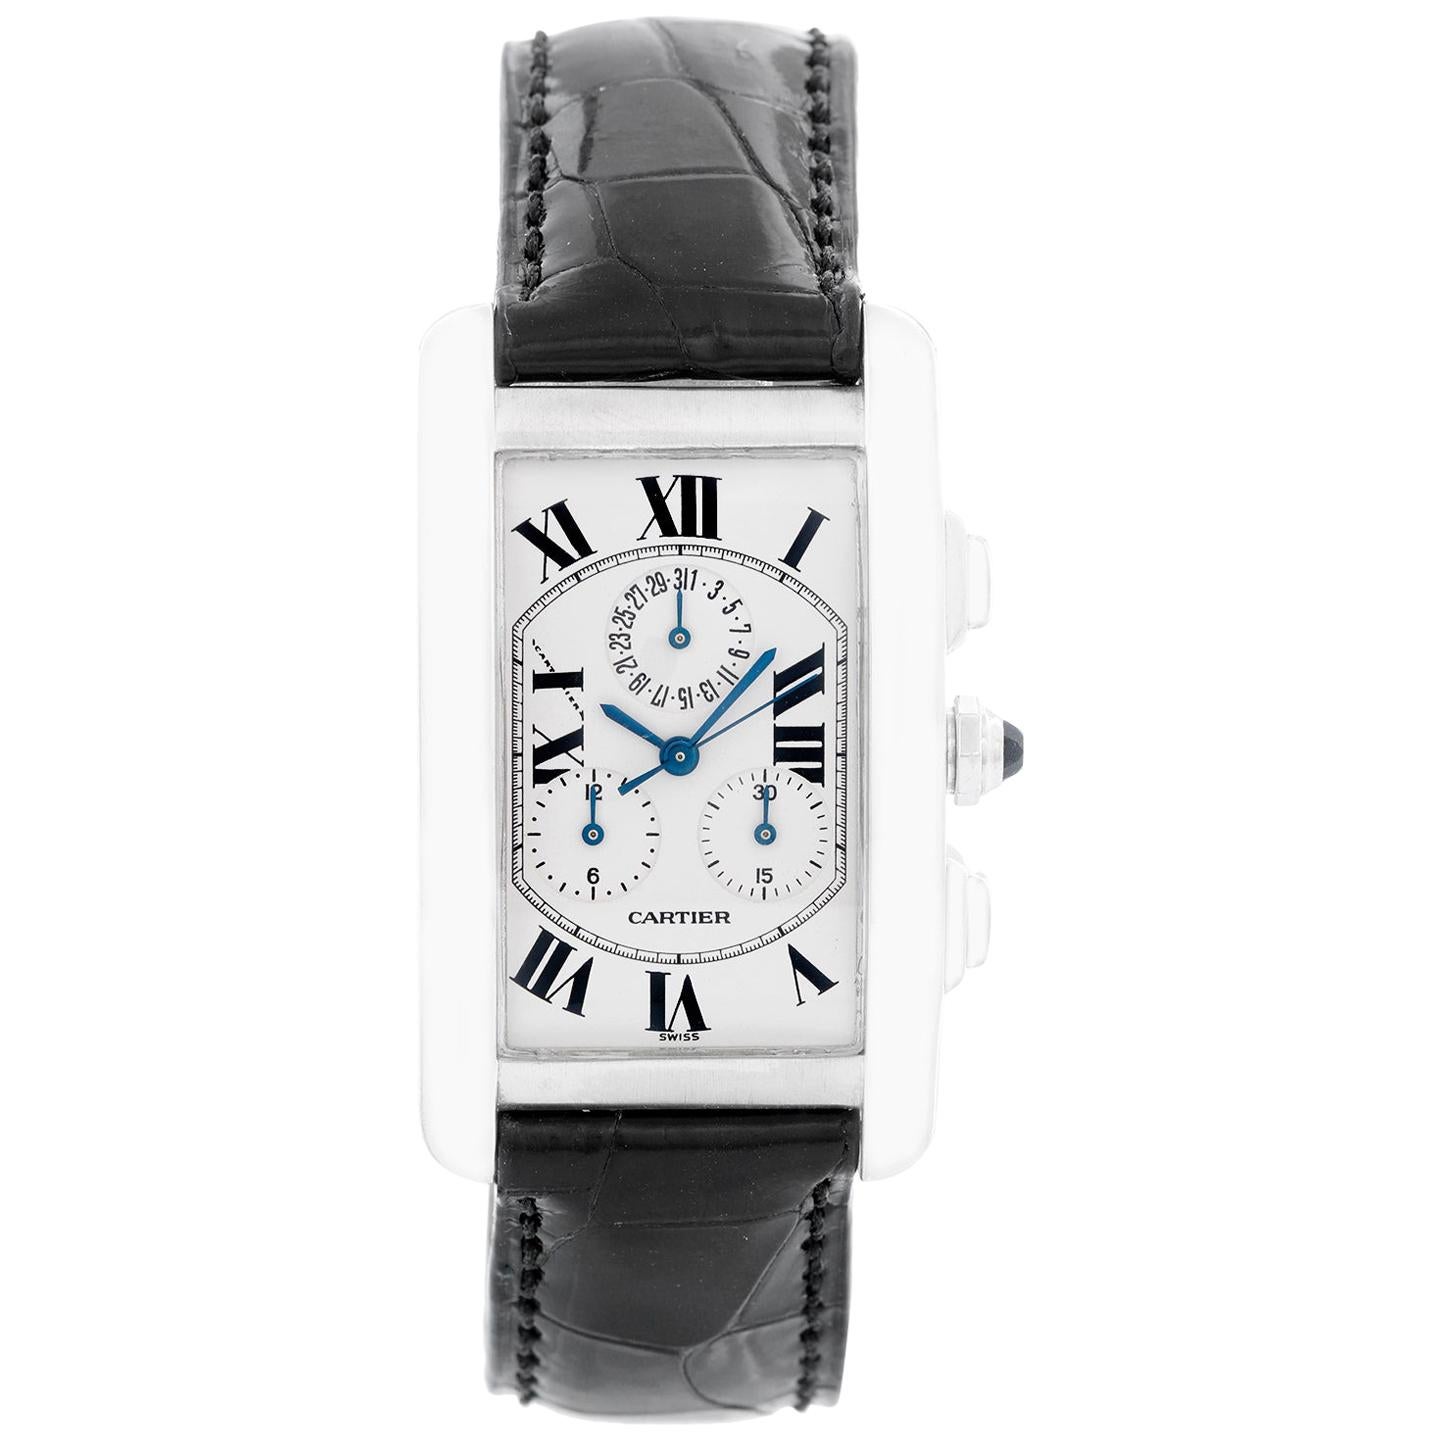 Cartier Tank Americaine 'or American' Chronograph Men's Watch W2603356